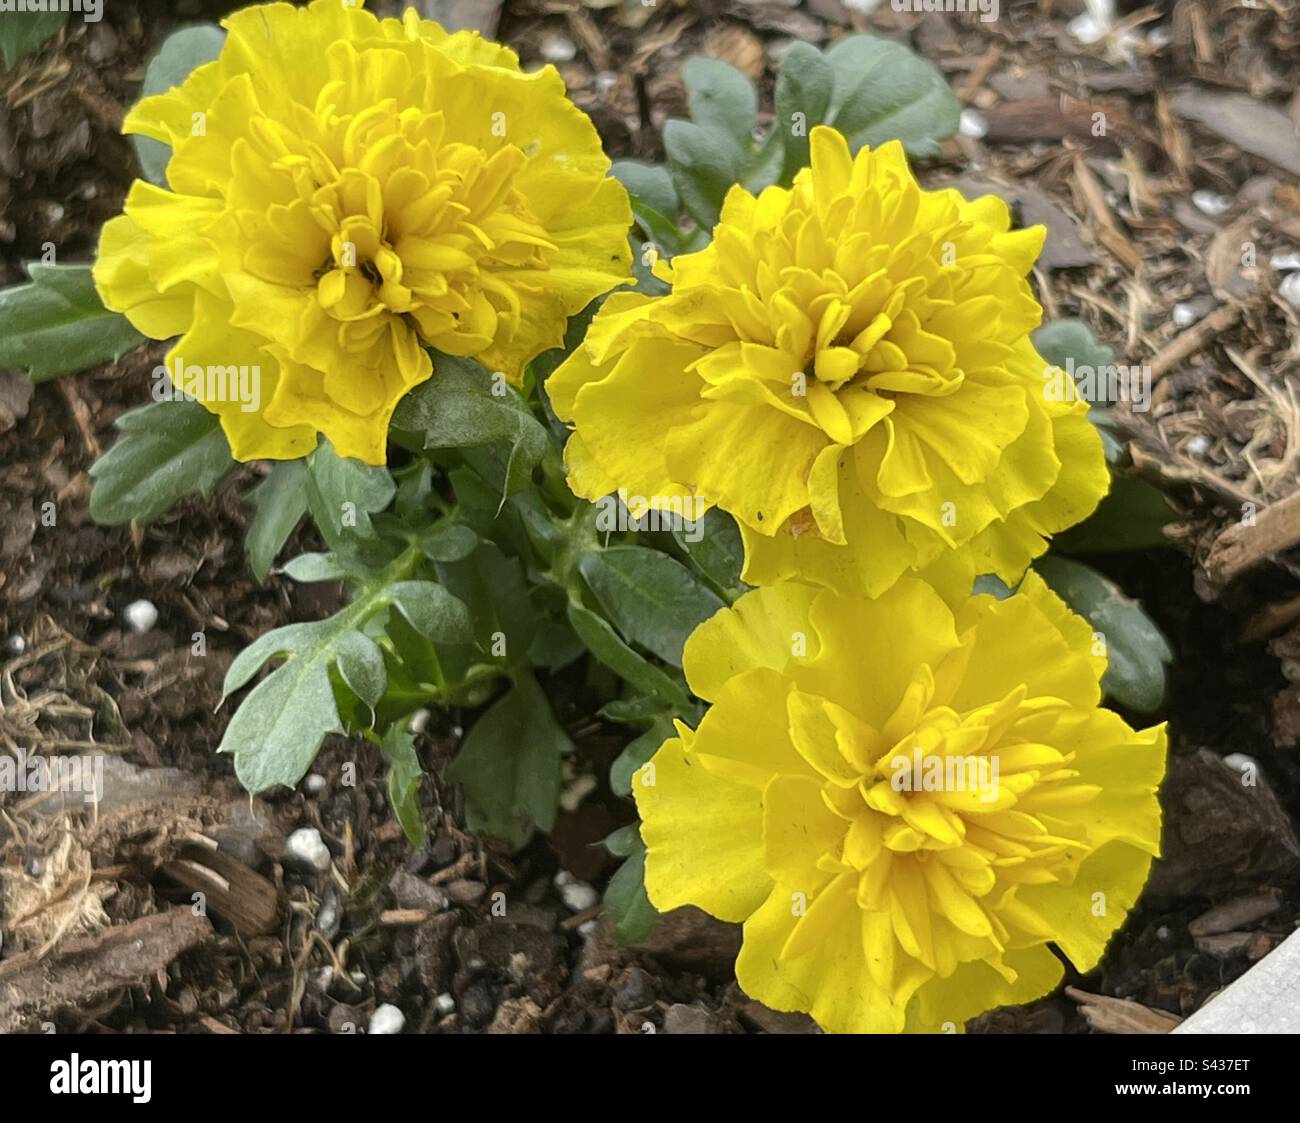 3 yellow marigolds in a pot of potting solid. Stock Photo